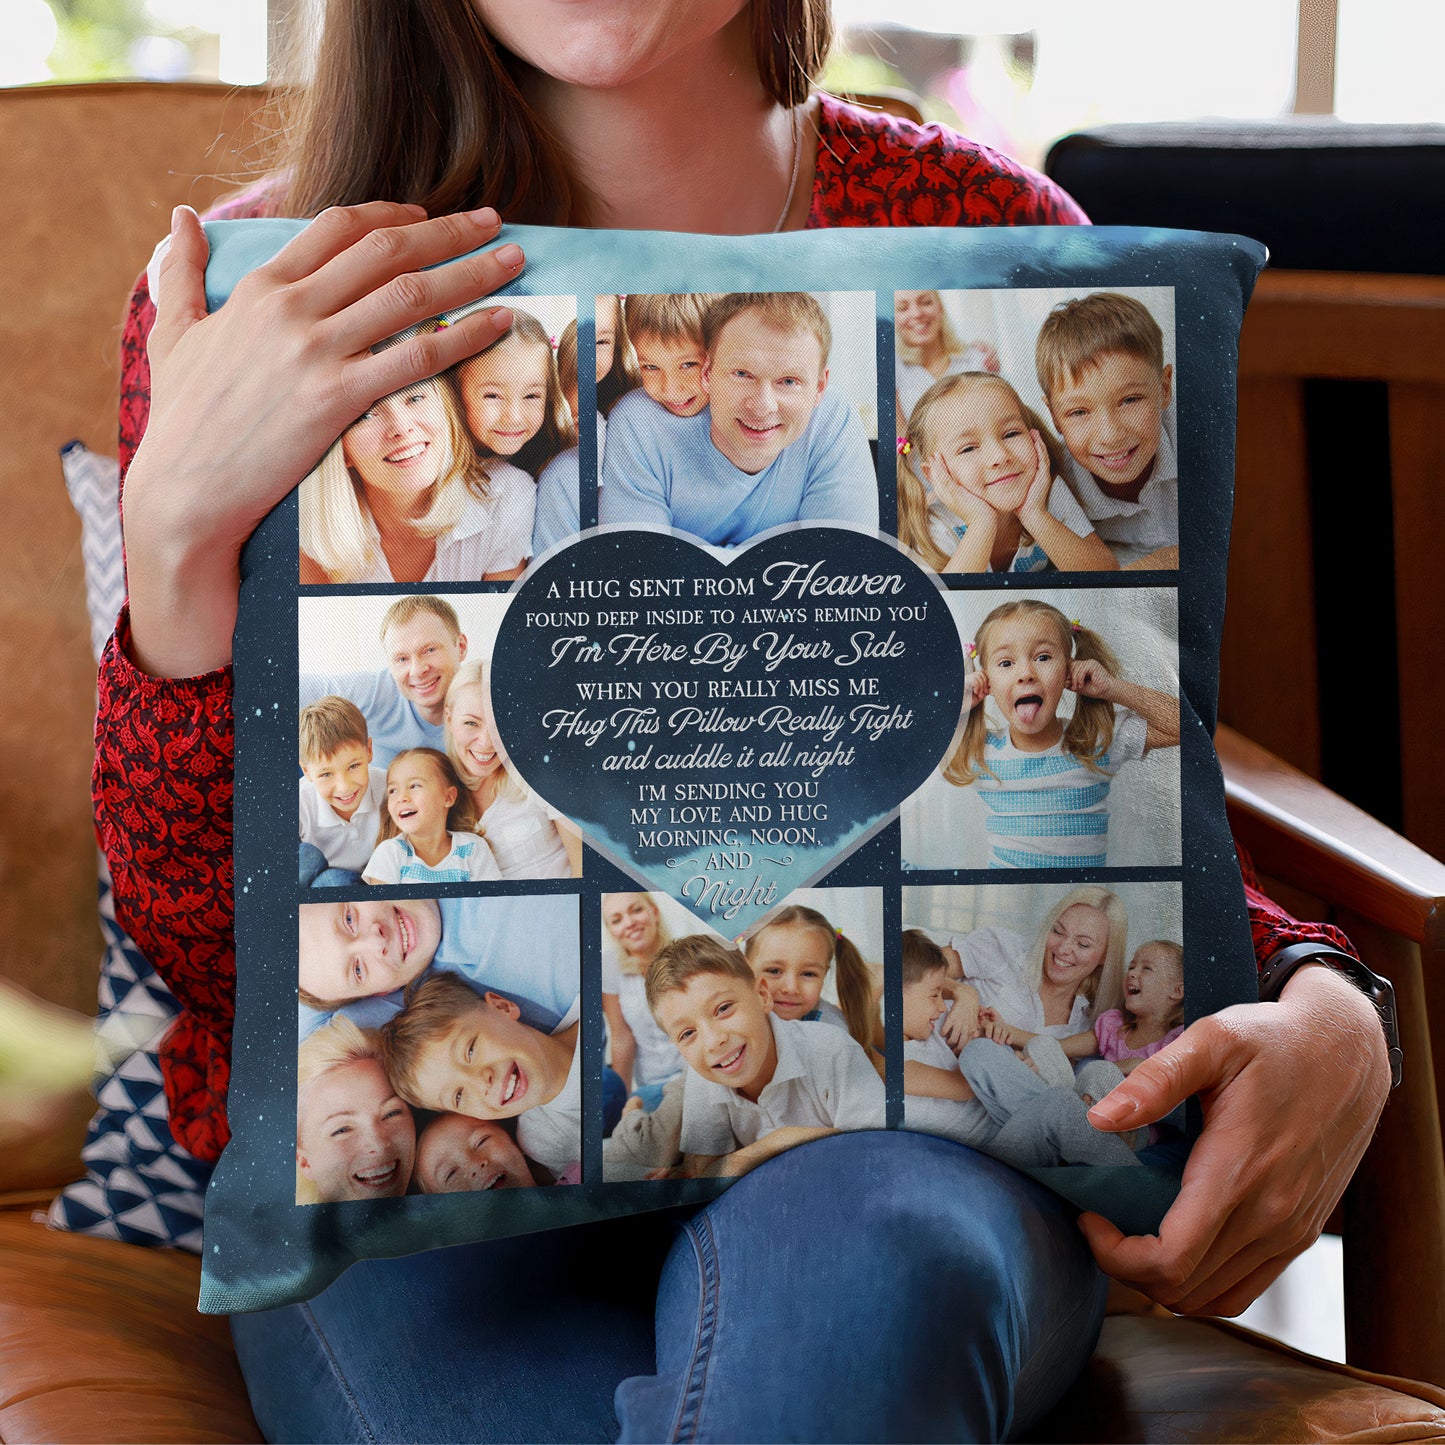 A Hug Sent From Heaven - Personalized Photo Pillow (Insert Included)